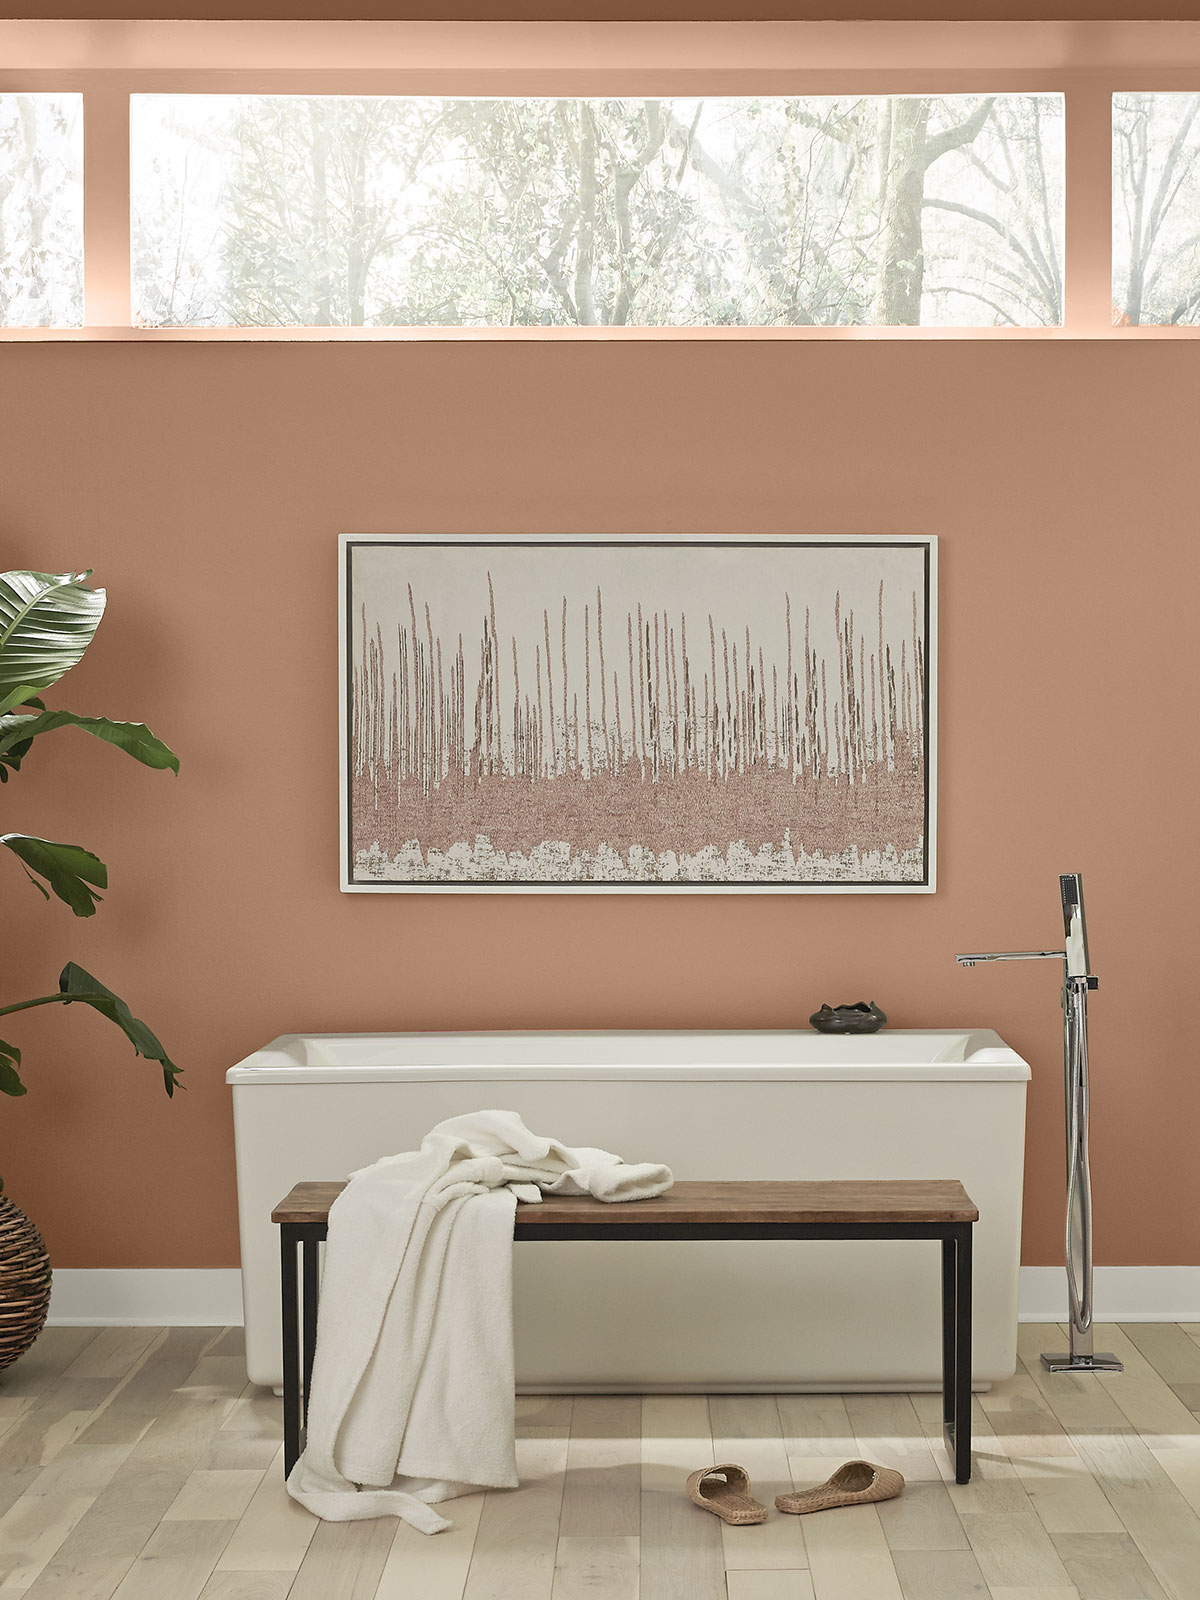 A bathroom showing a white tub and wood bench placed against a tall painted wall in the color Canyon Dusk.